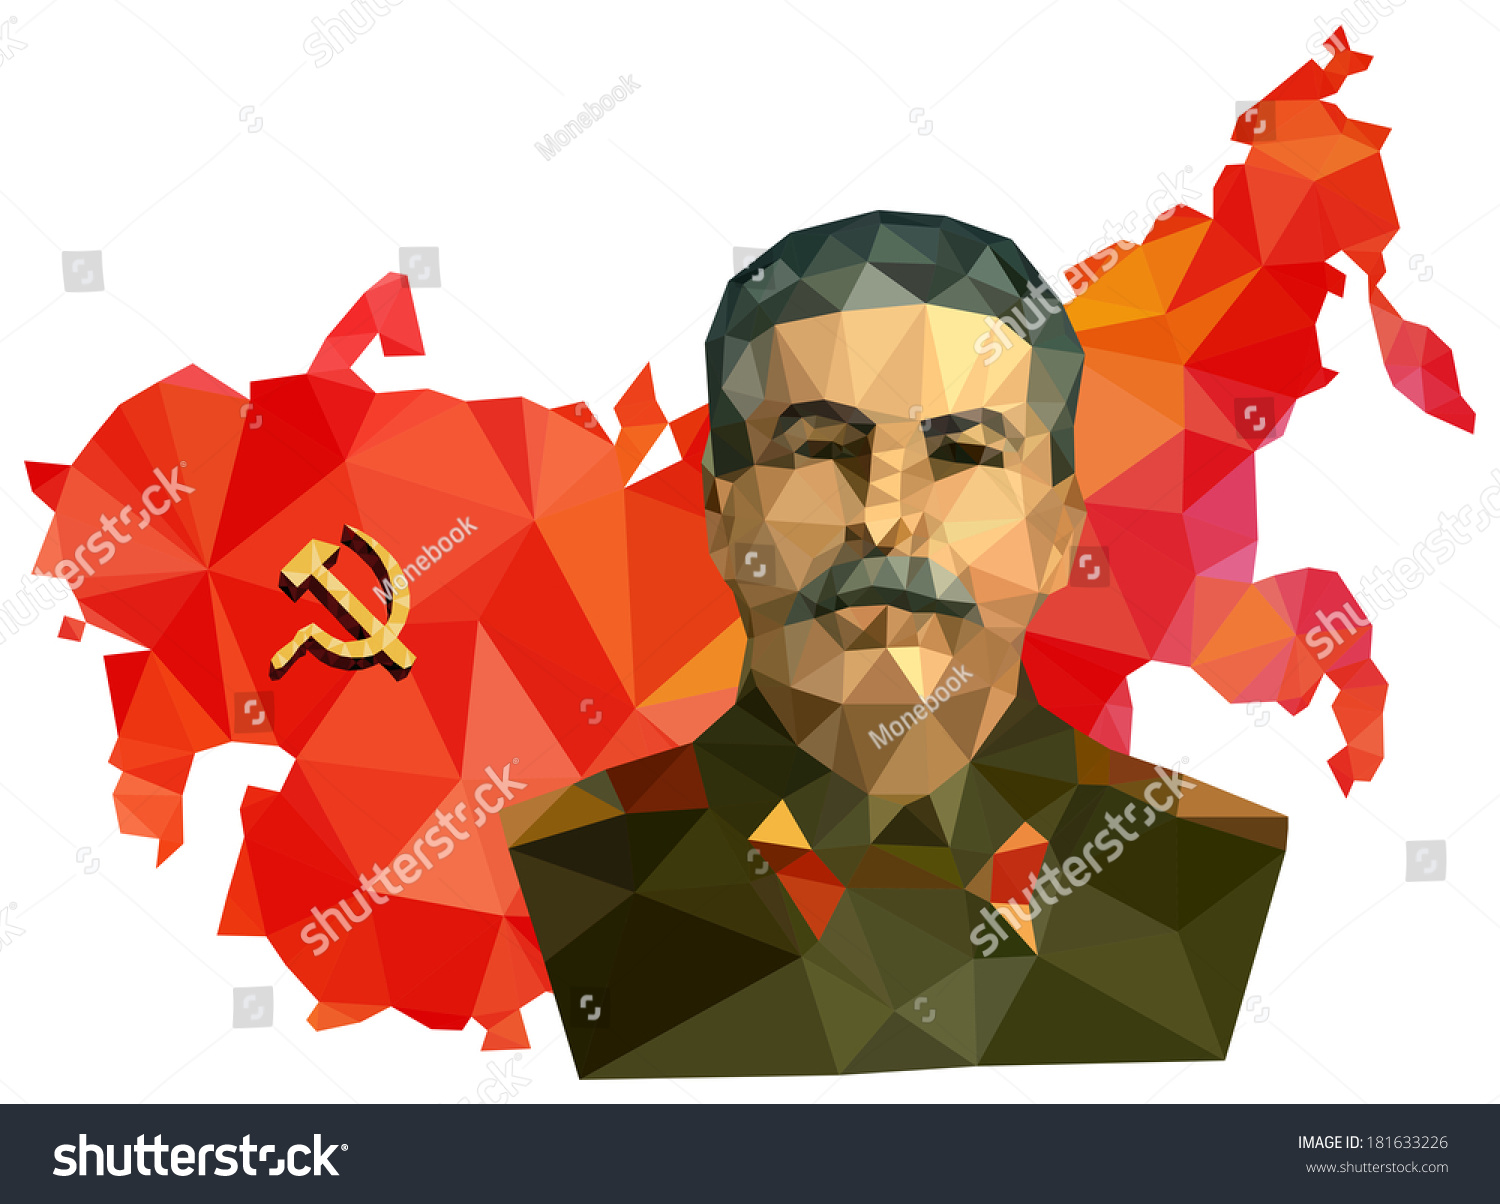 Soviet Union, Ussr, Map With Flag, Portrait Of Stalin ...